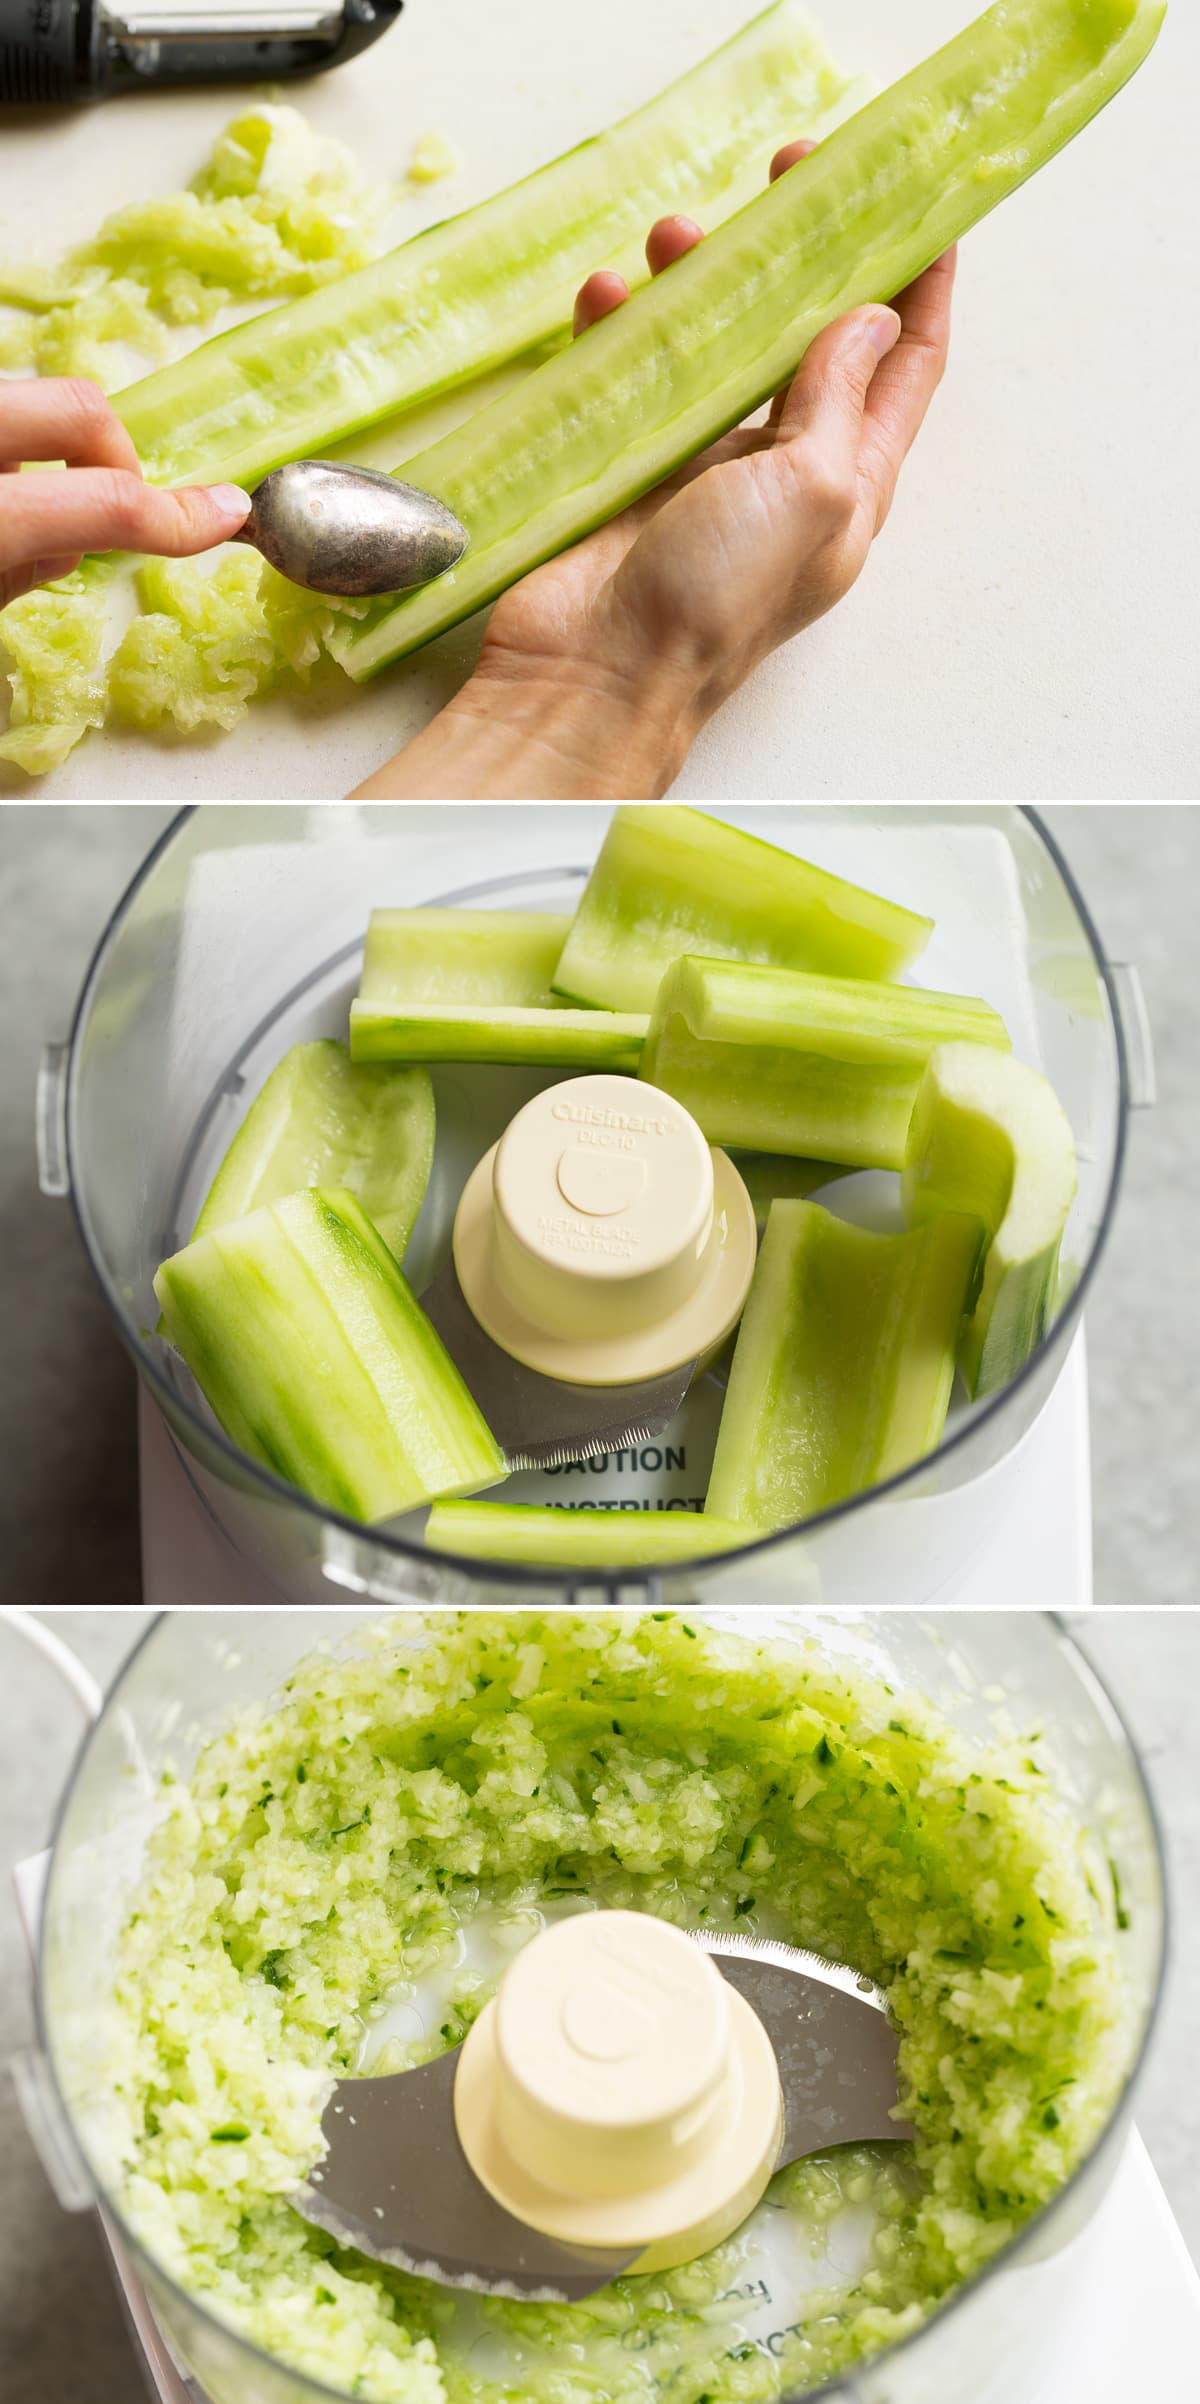 Collage image showing three steps to prepare cucumber for tzatziki sauce. Shows removing seeds from cucumber, placing chunks in a food processor and cucumbers after being minced in processor.